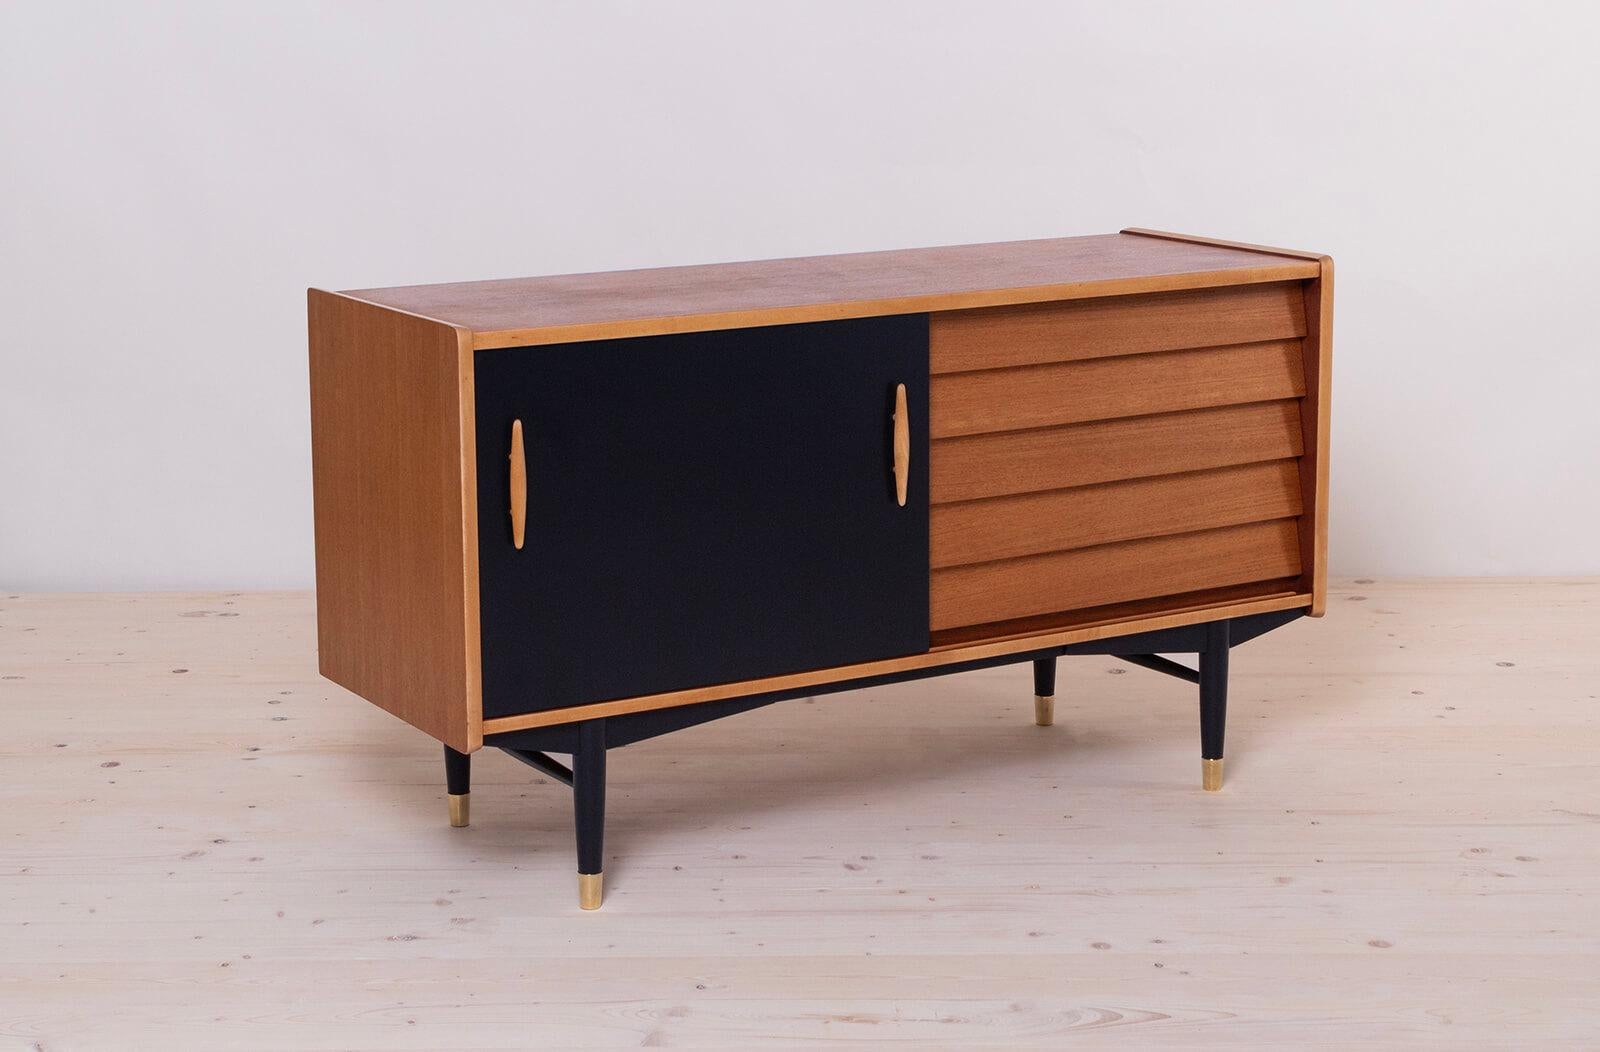 This is not so common model of sideboard by Nils Jonsson in teak wood with black sliding door, a sculpted handle, elegant black base completed with subtle brass legs cups - a great example of Scandinavian Modern style in its best. The piece was